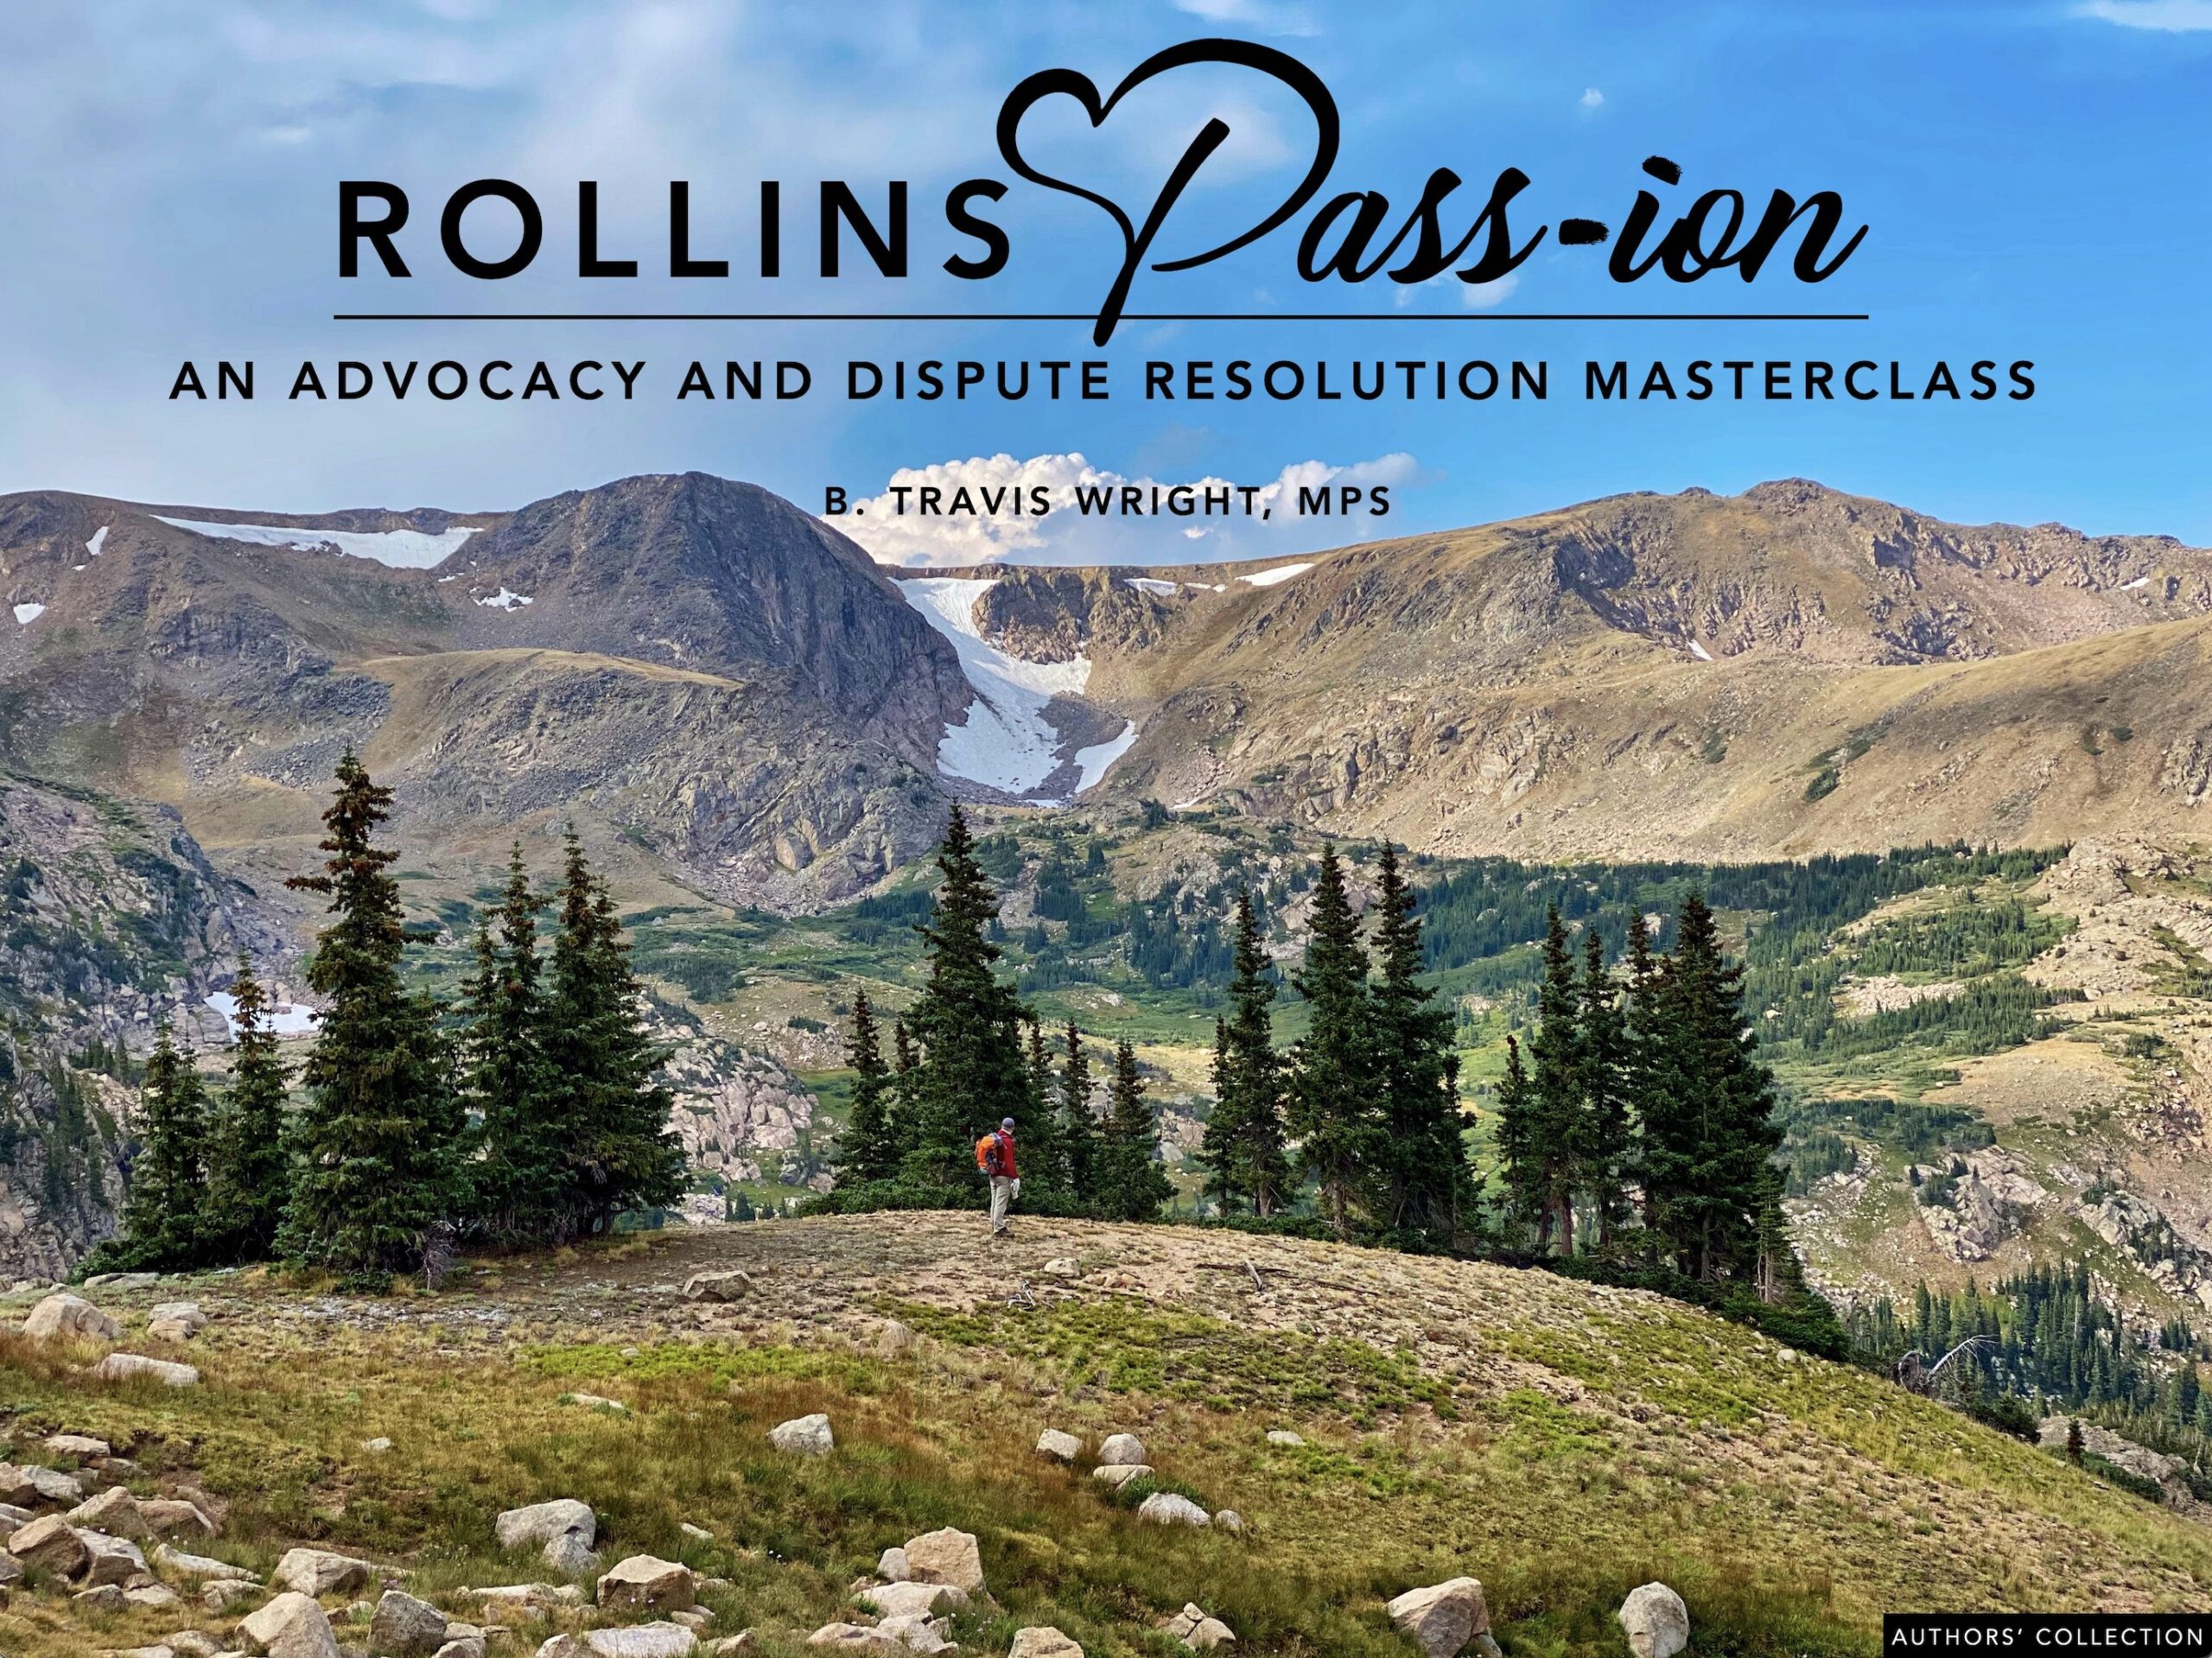 Rollins Pass-ion